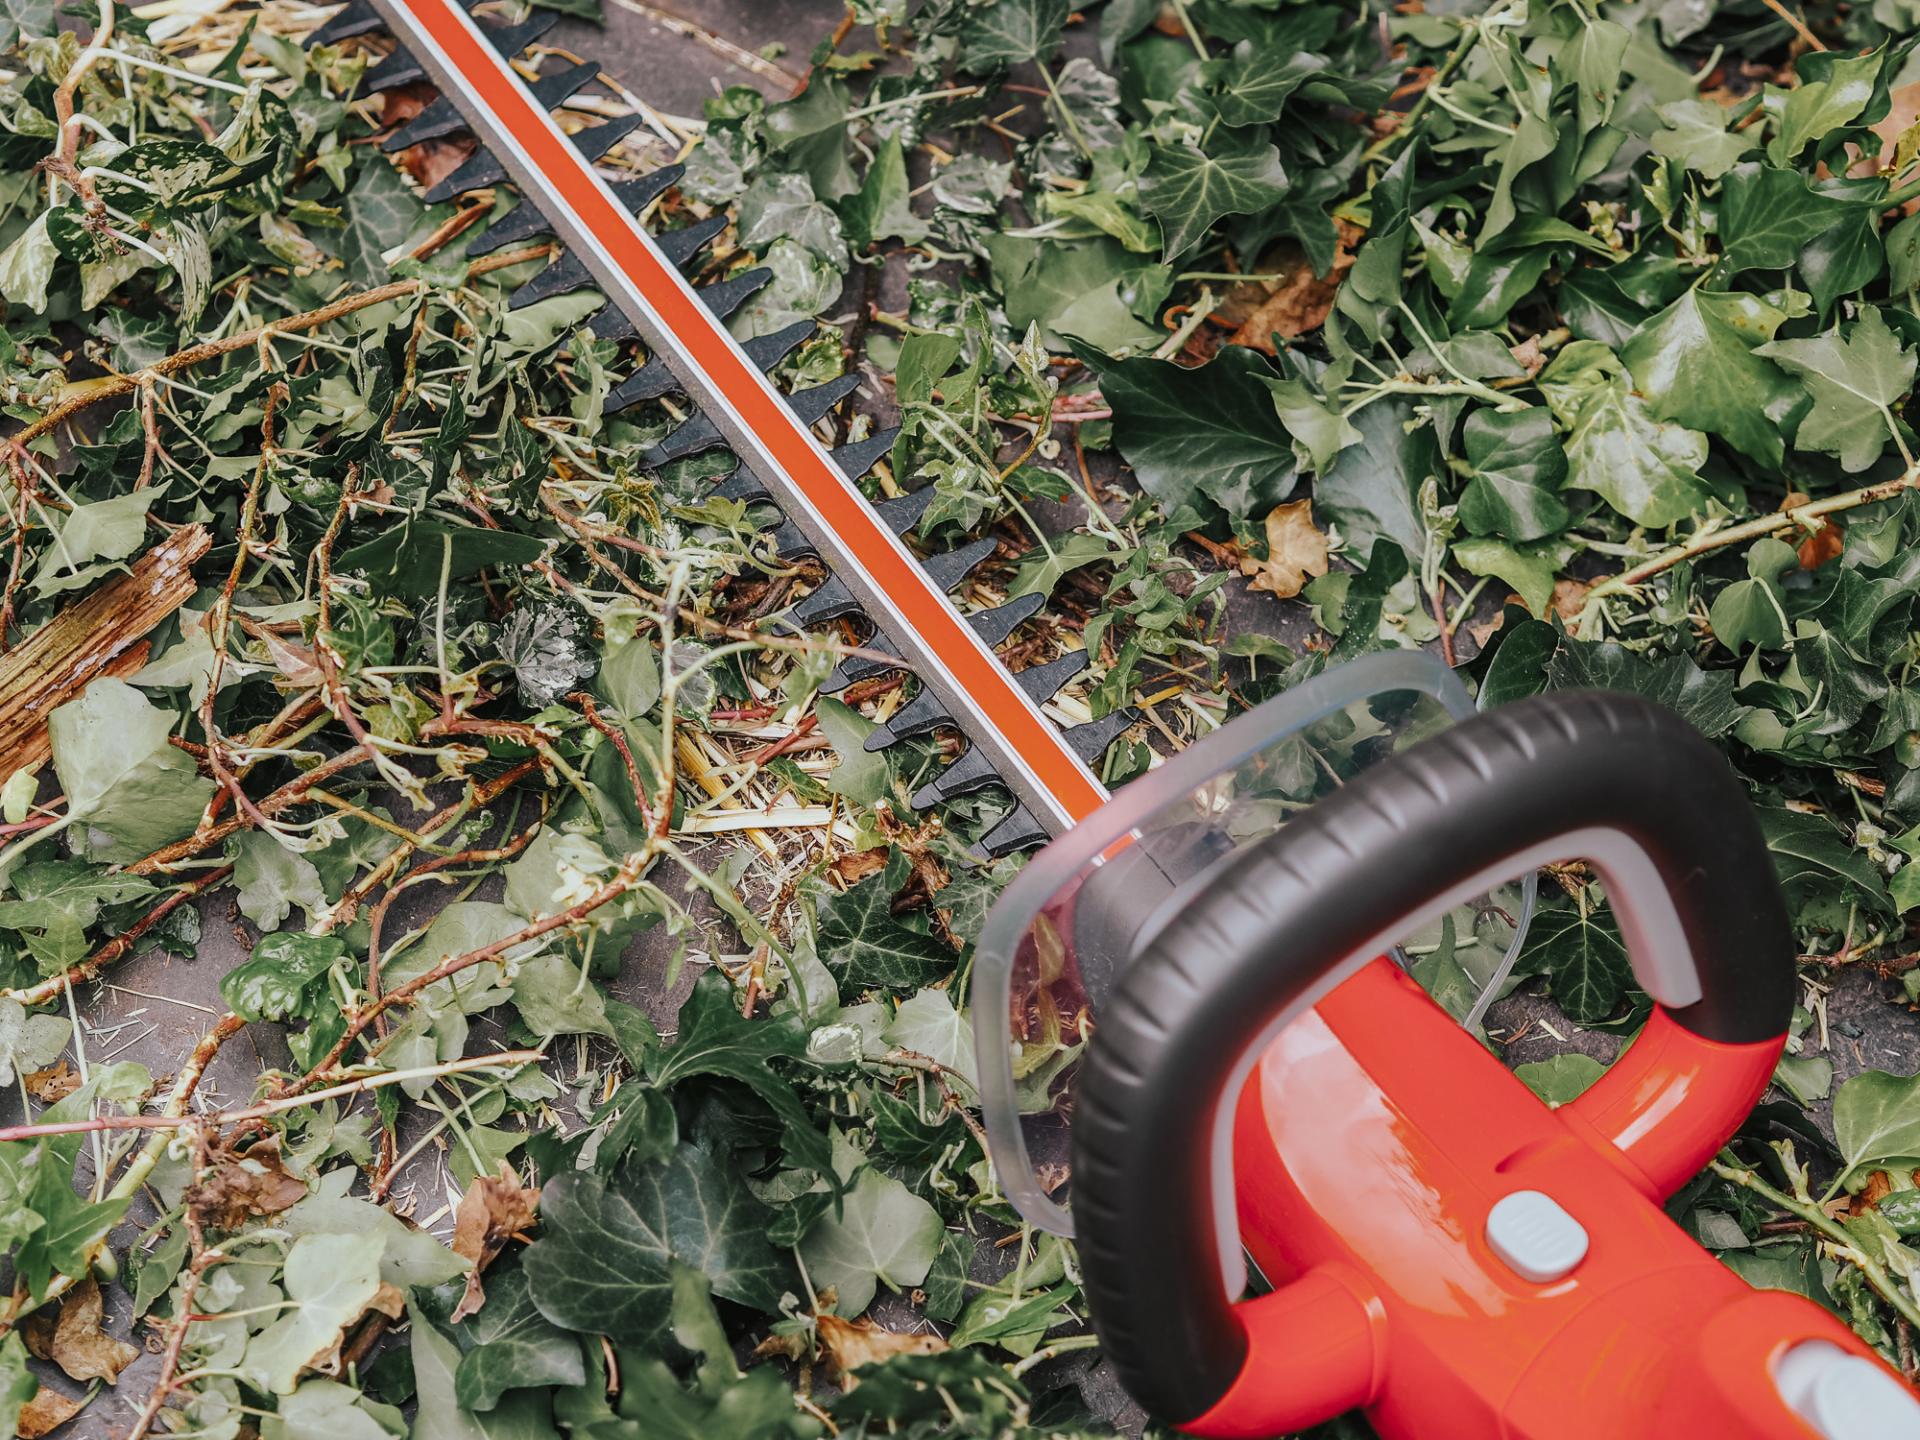 Flymo hedge trimmer review from blogger Bunnipunch